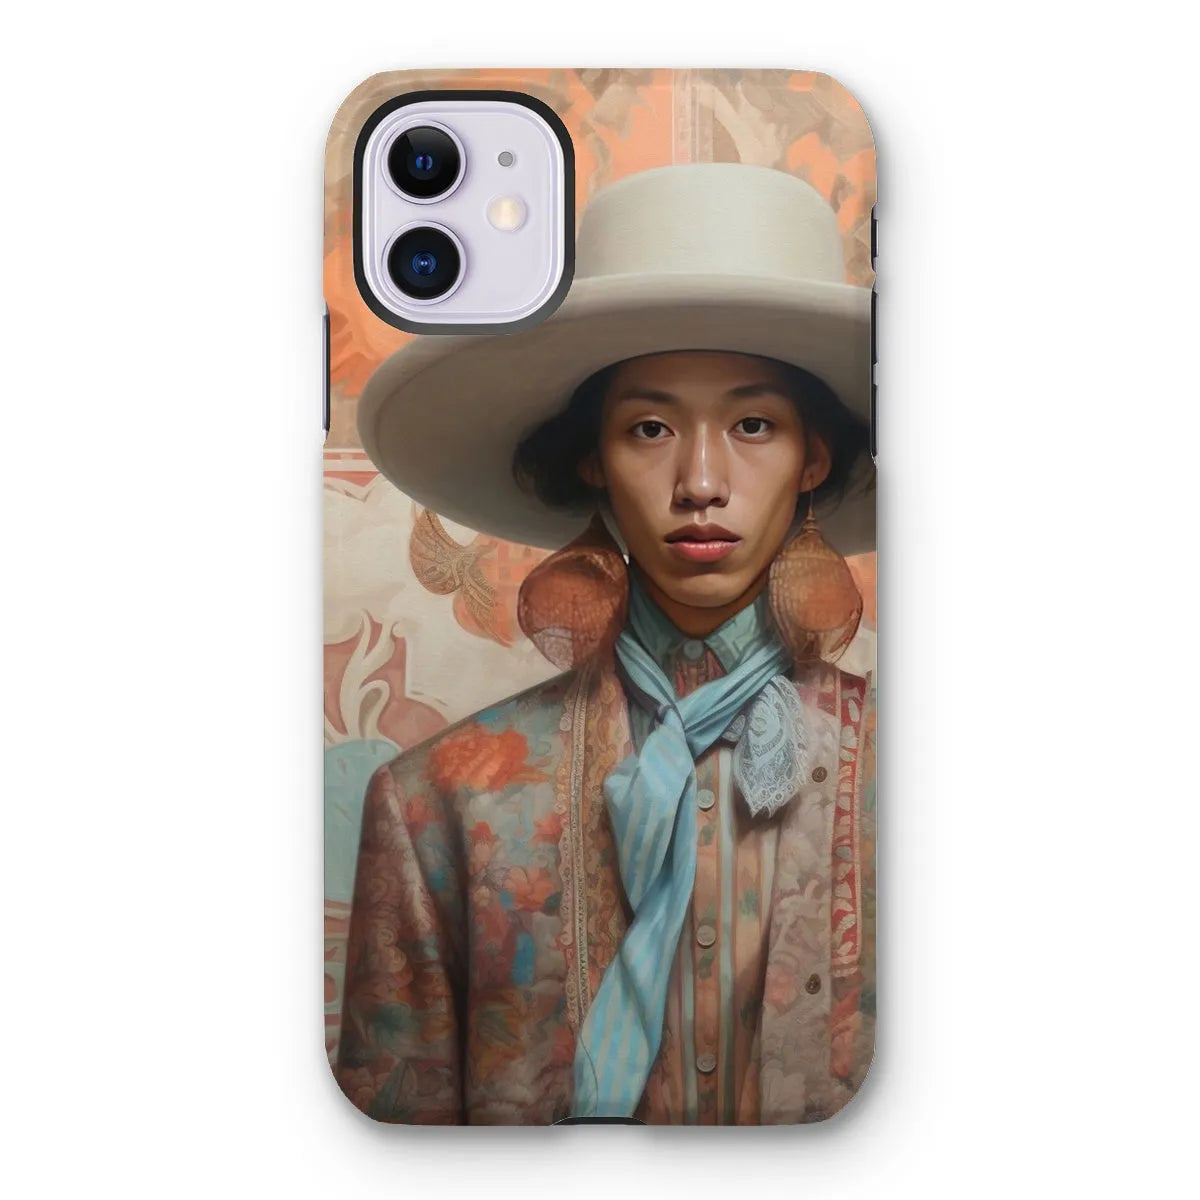 Iyaan - Gay Malay Asian Cowboy Aesthetic Art Phone Case - Iphone 11 / Matte - Mobile Phone Cases - Aesthetic Art